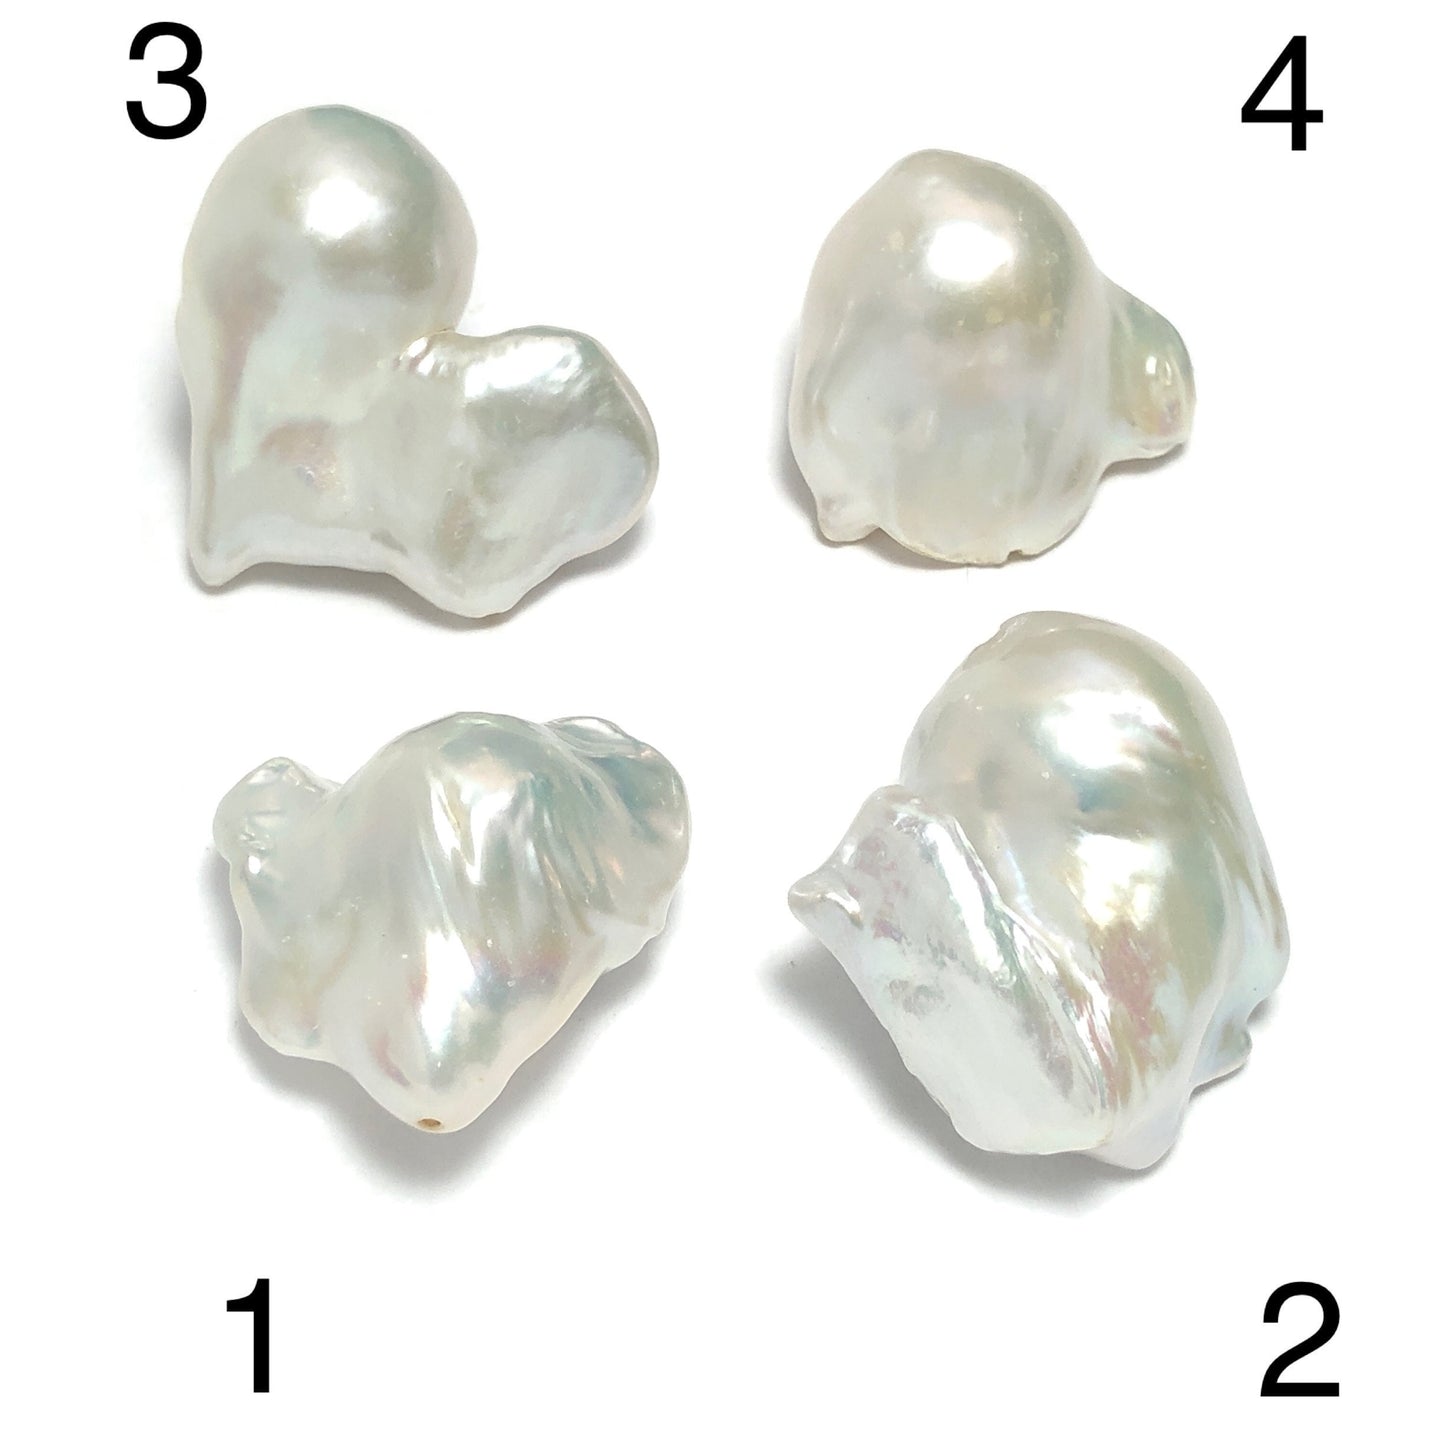 Baroque Pearls 23-25mm, Single Piece, White Color. BAR_S030